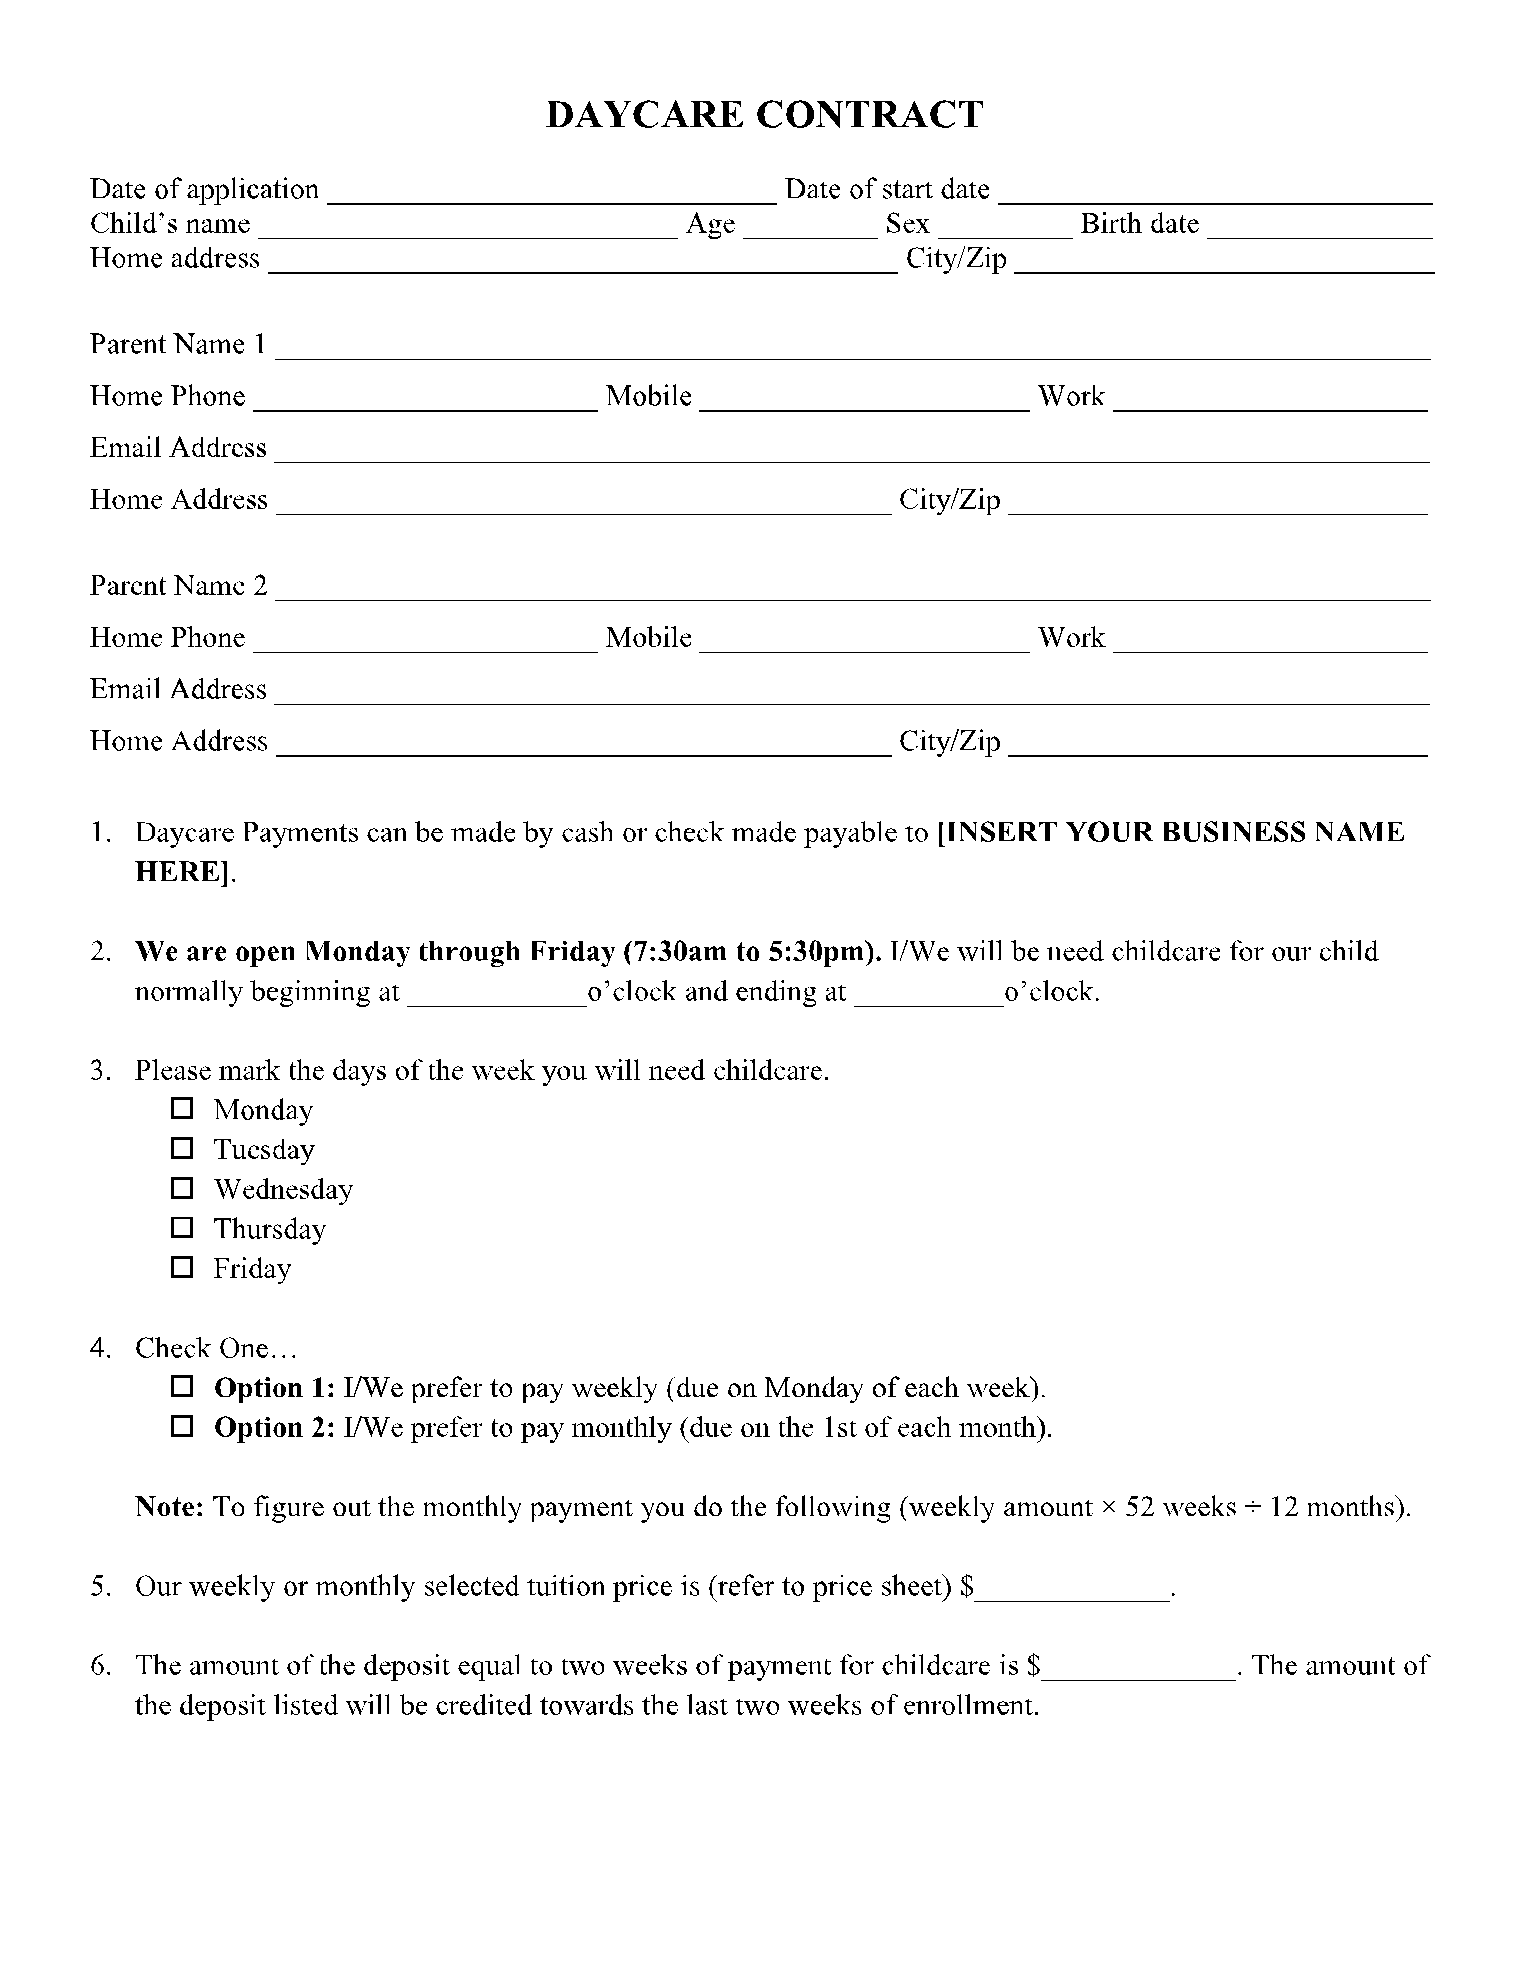 Daycare Contract Template 1